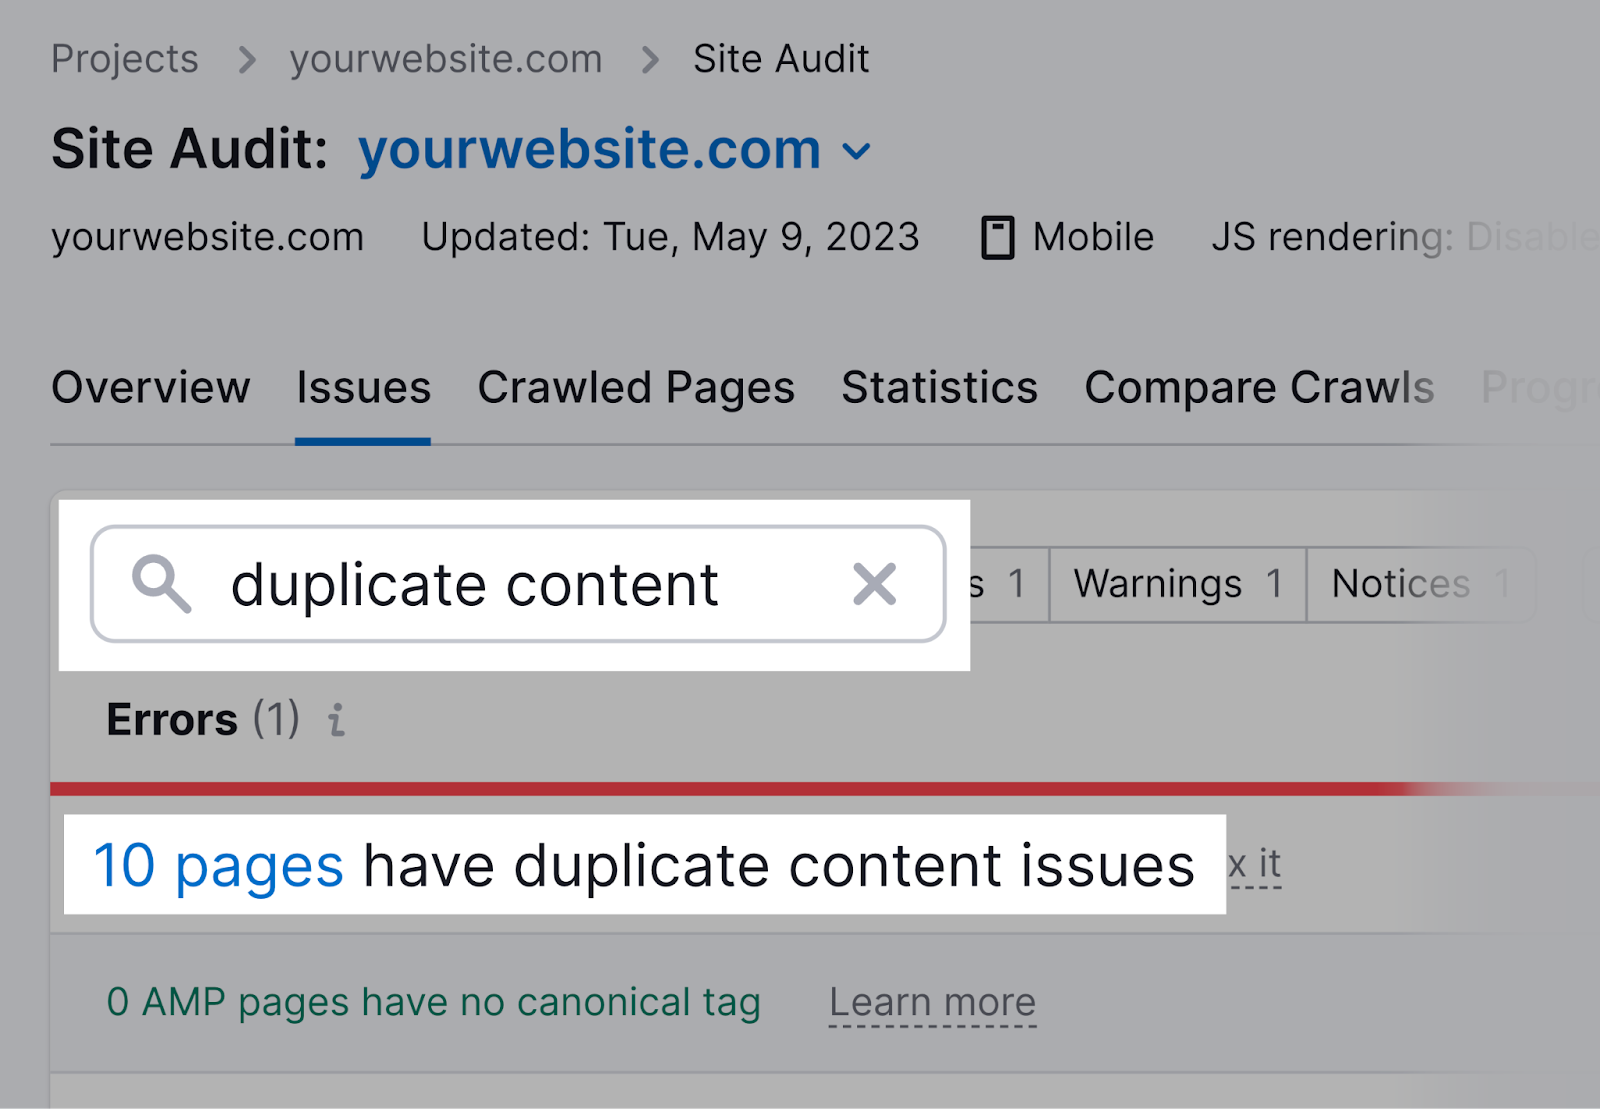 search for “duplicate content” in Site Audit "Issues" tab